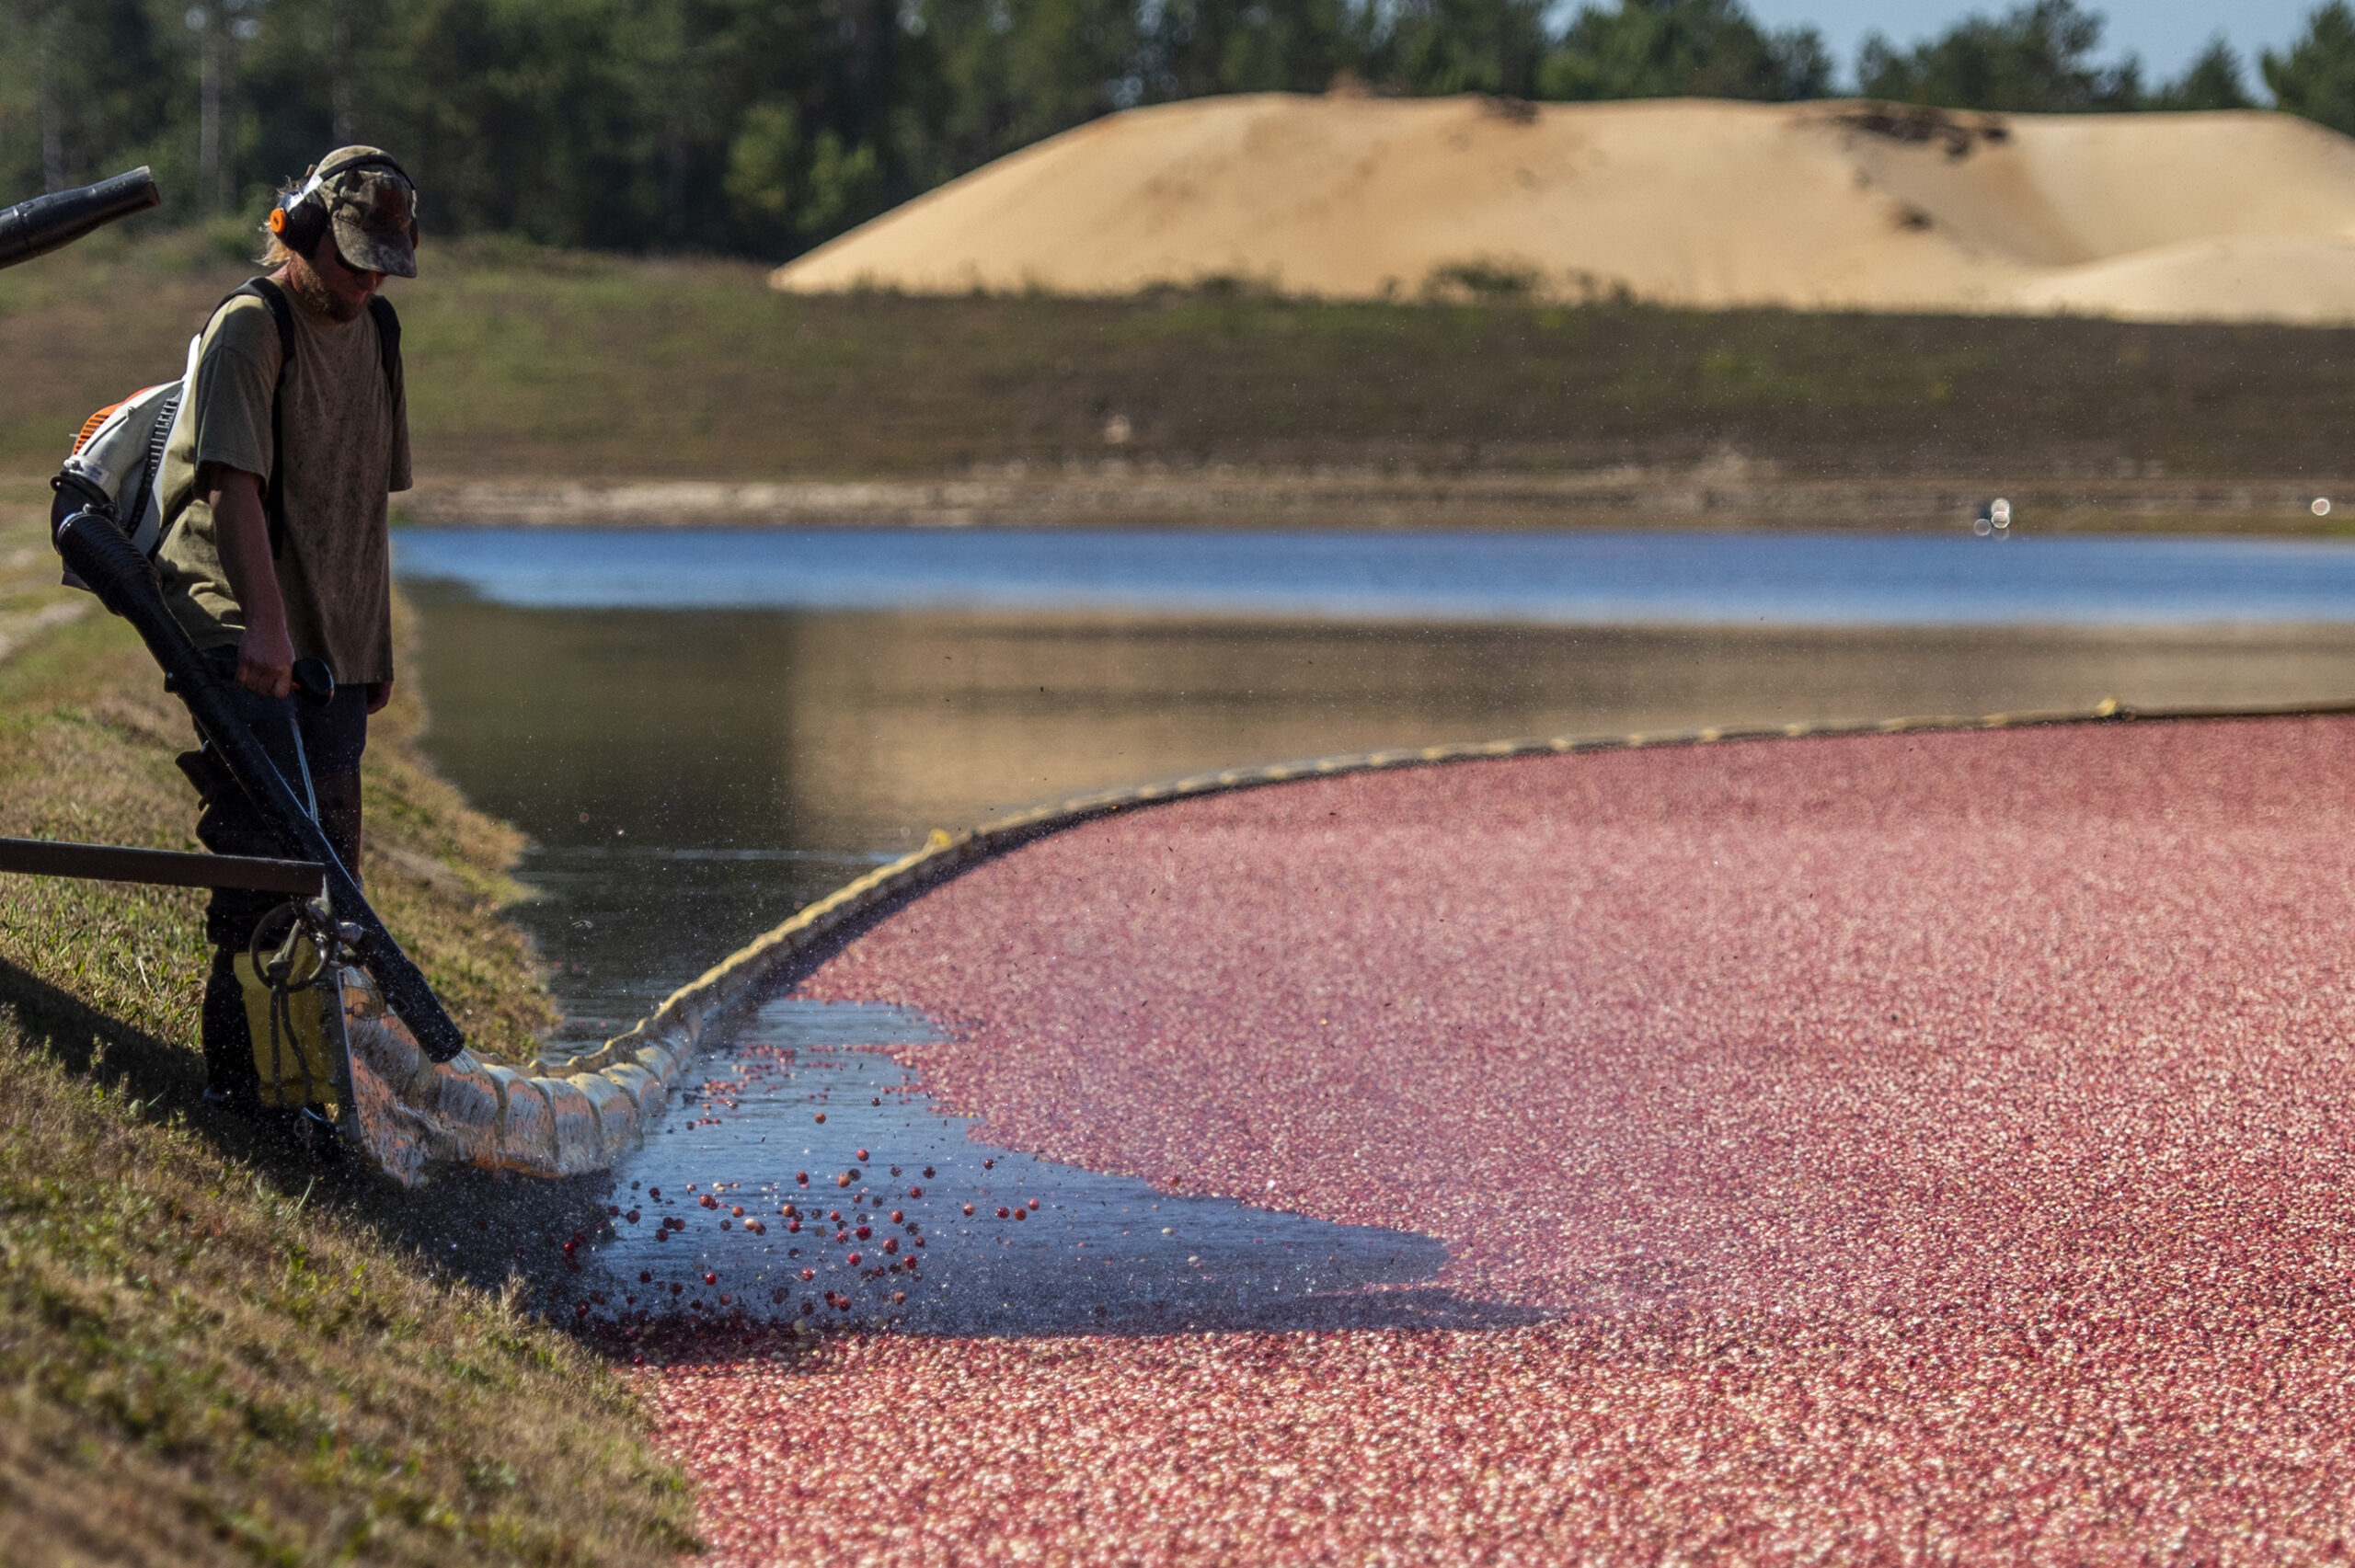 A worker uses a blower to move berries away from the edge of the bog.